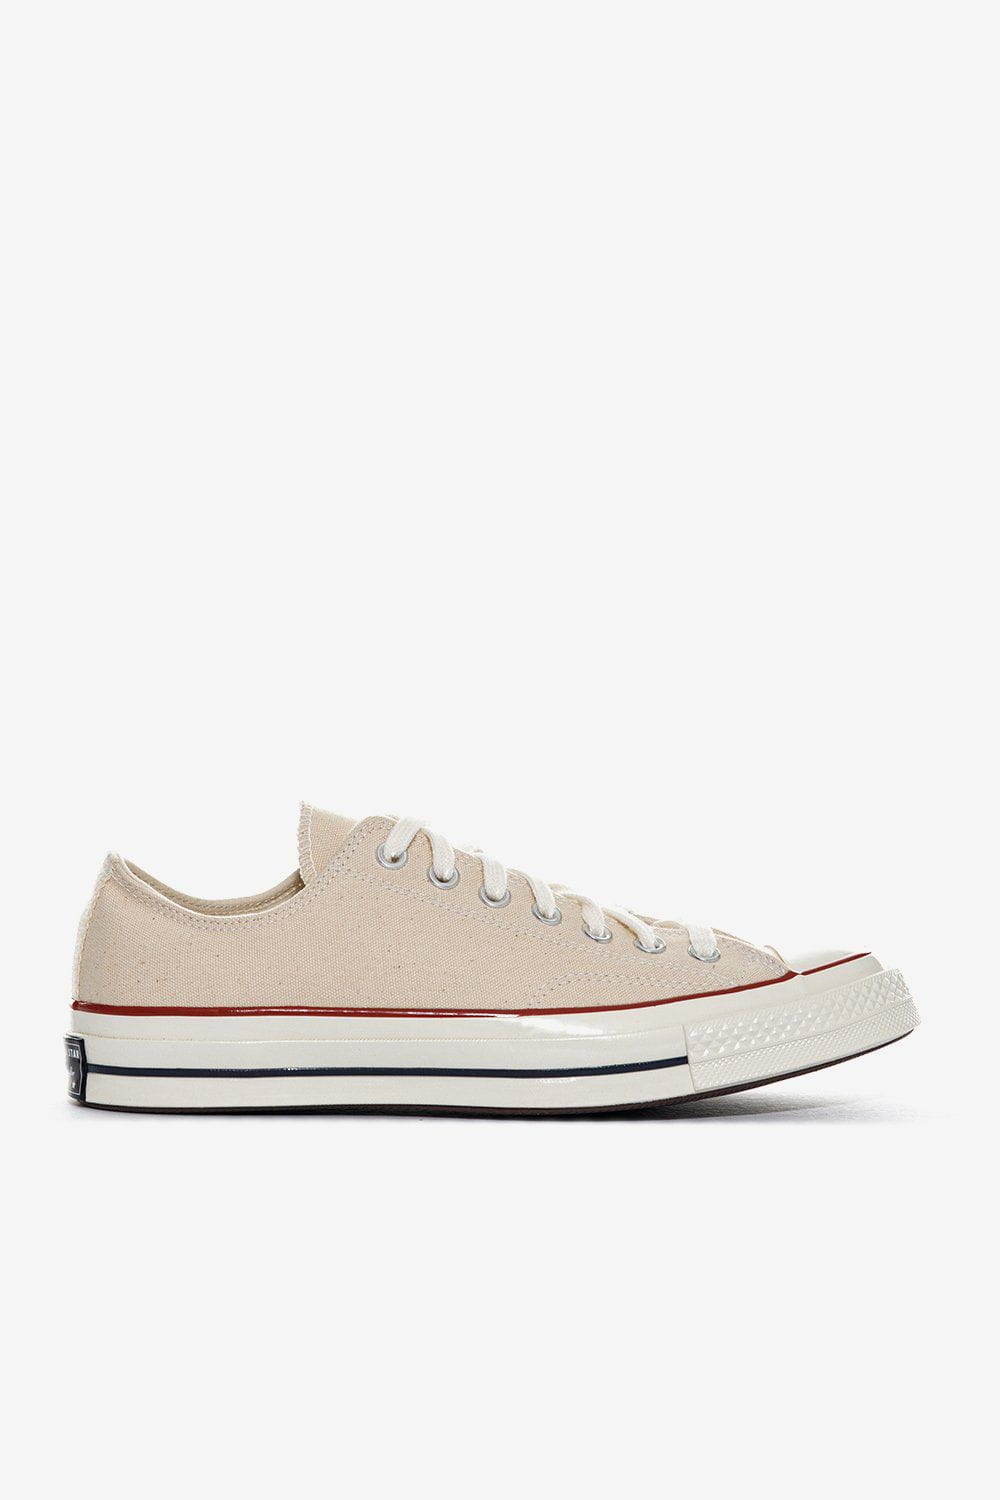 Converse Taylor 70 Ox Parchment | Commonwealth Philippines – Commonwealth Philippines | For The Greater Good